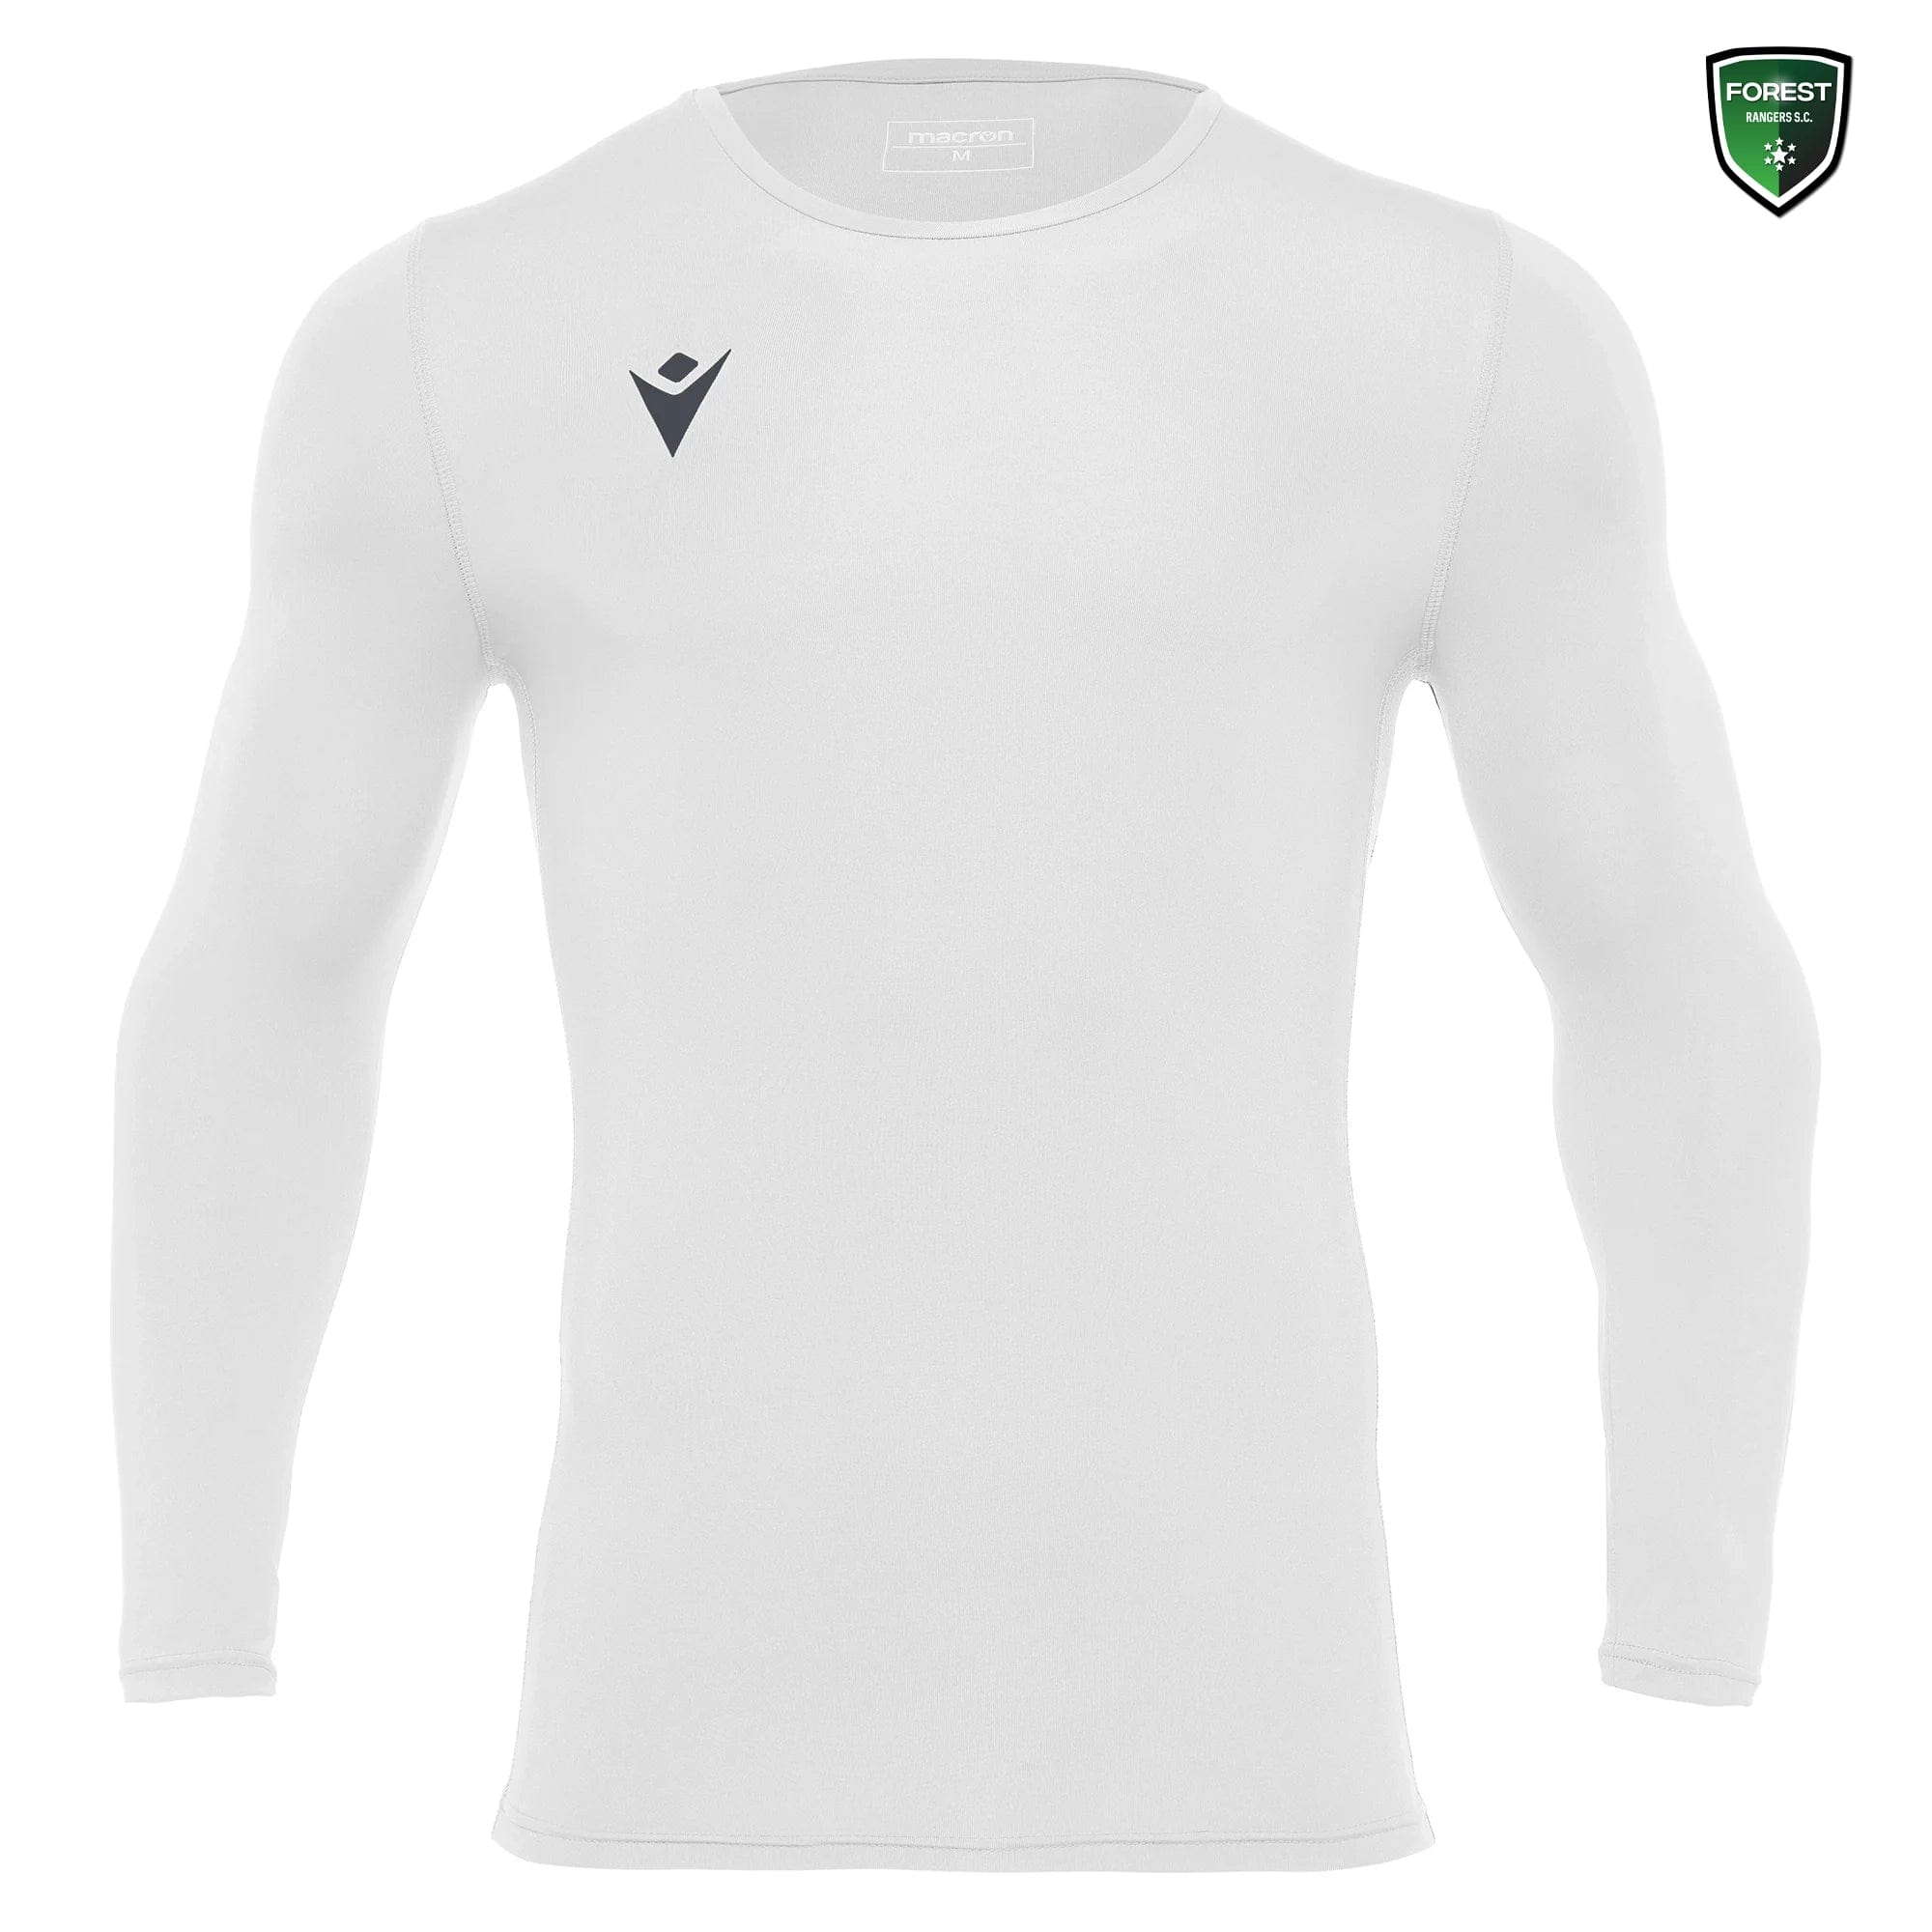 FOREST RANGERS HOLLY UNDERSHIRT